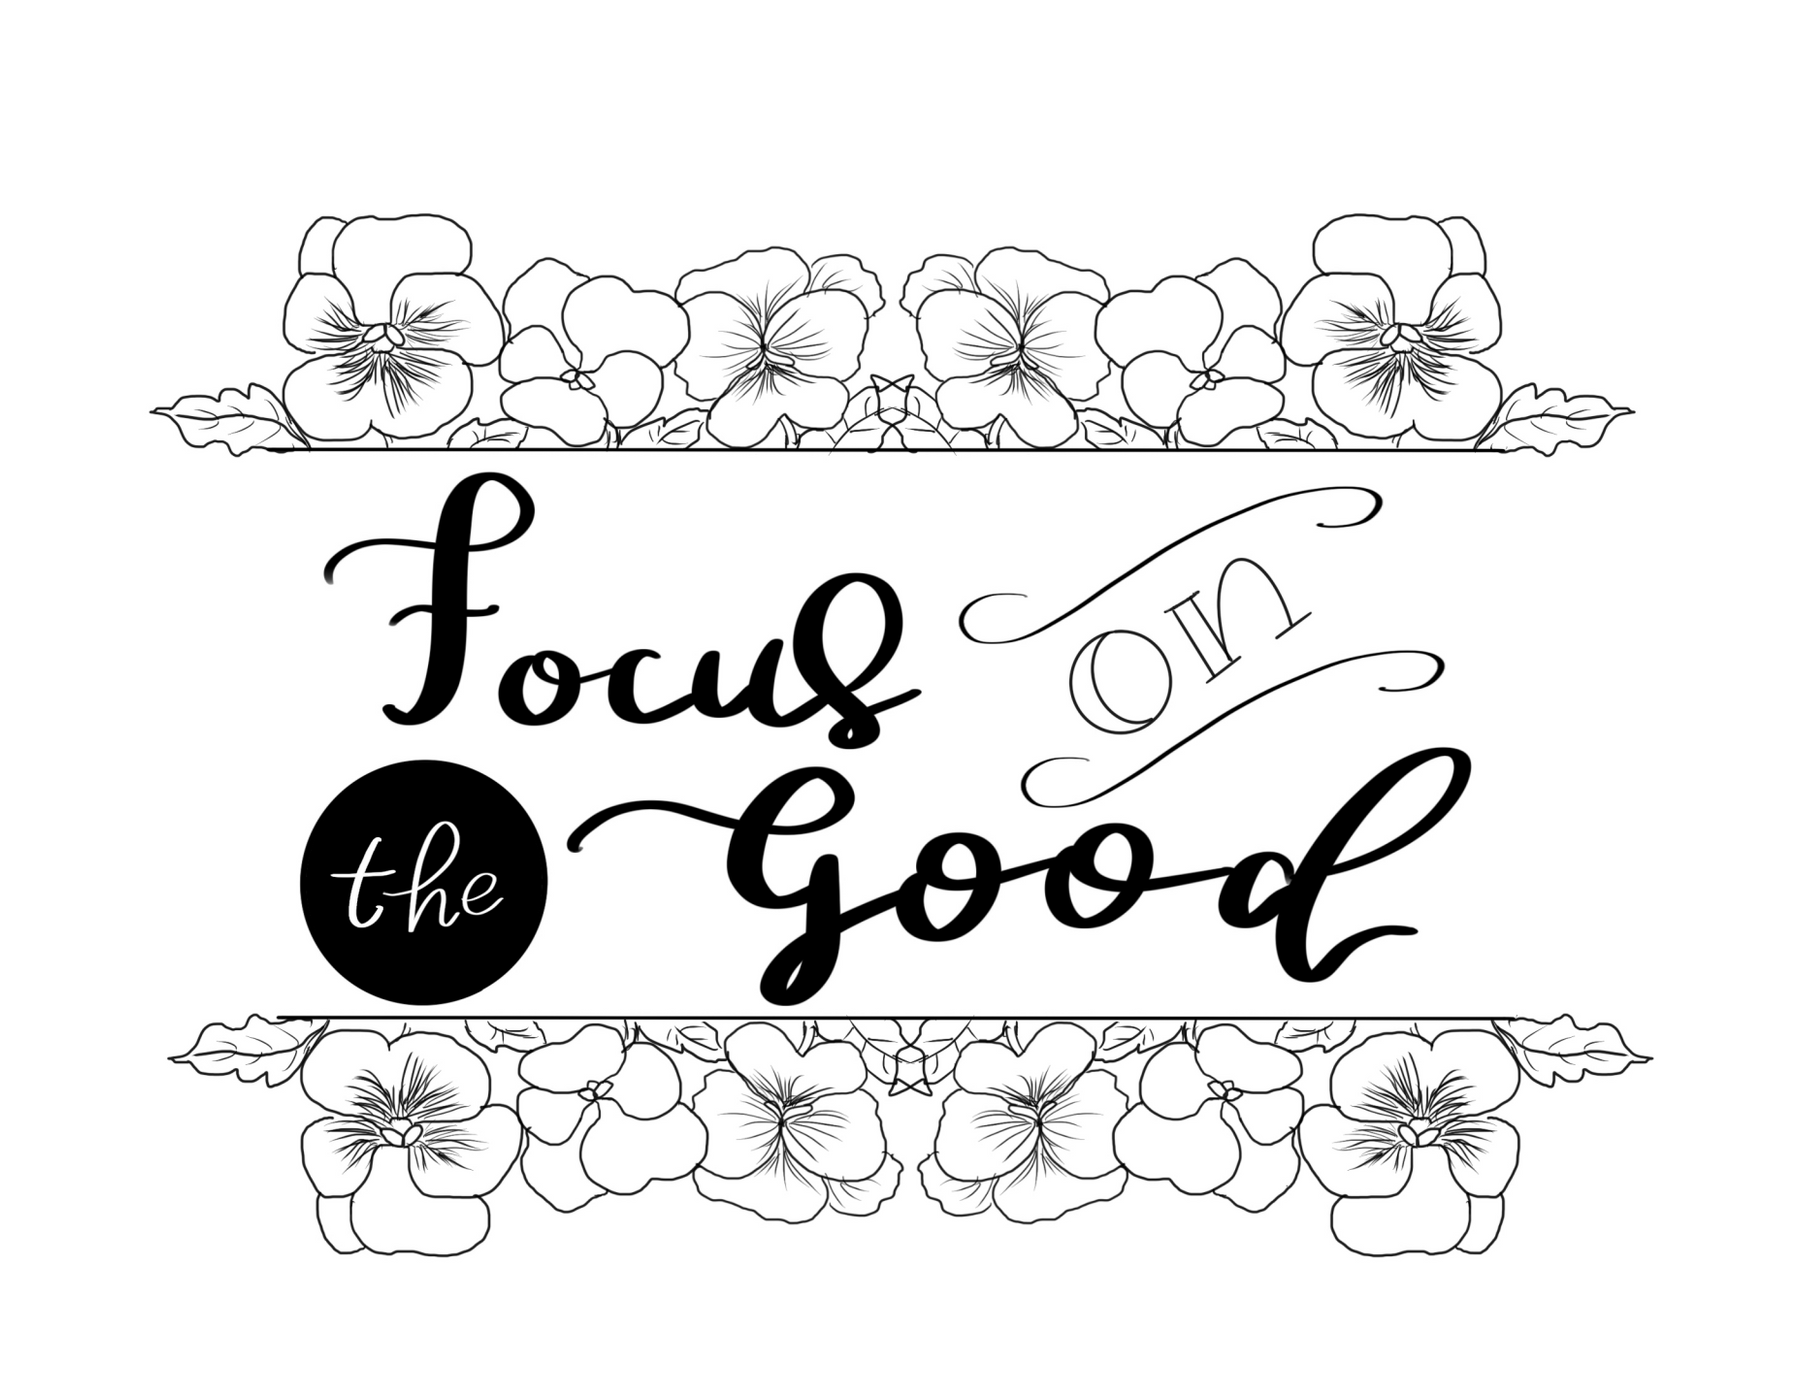 Focus on the Good - Free Coloring Page